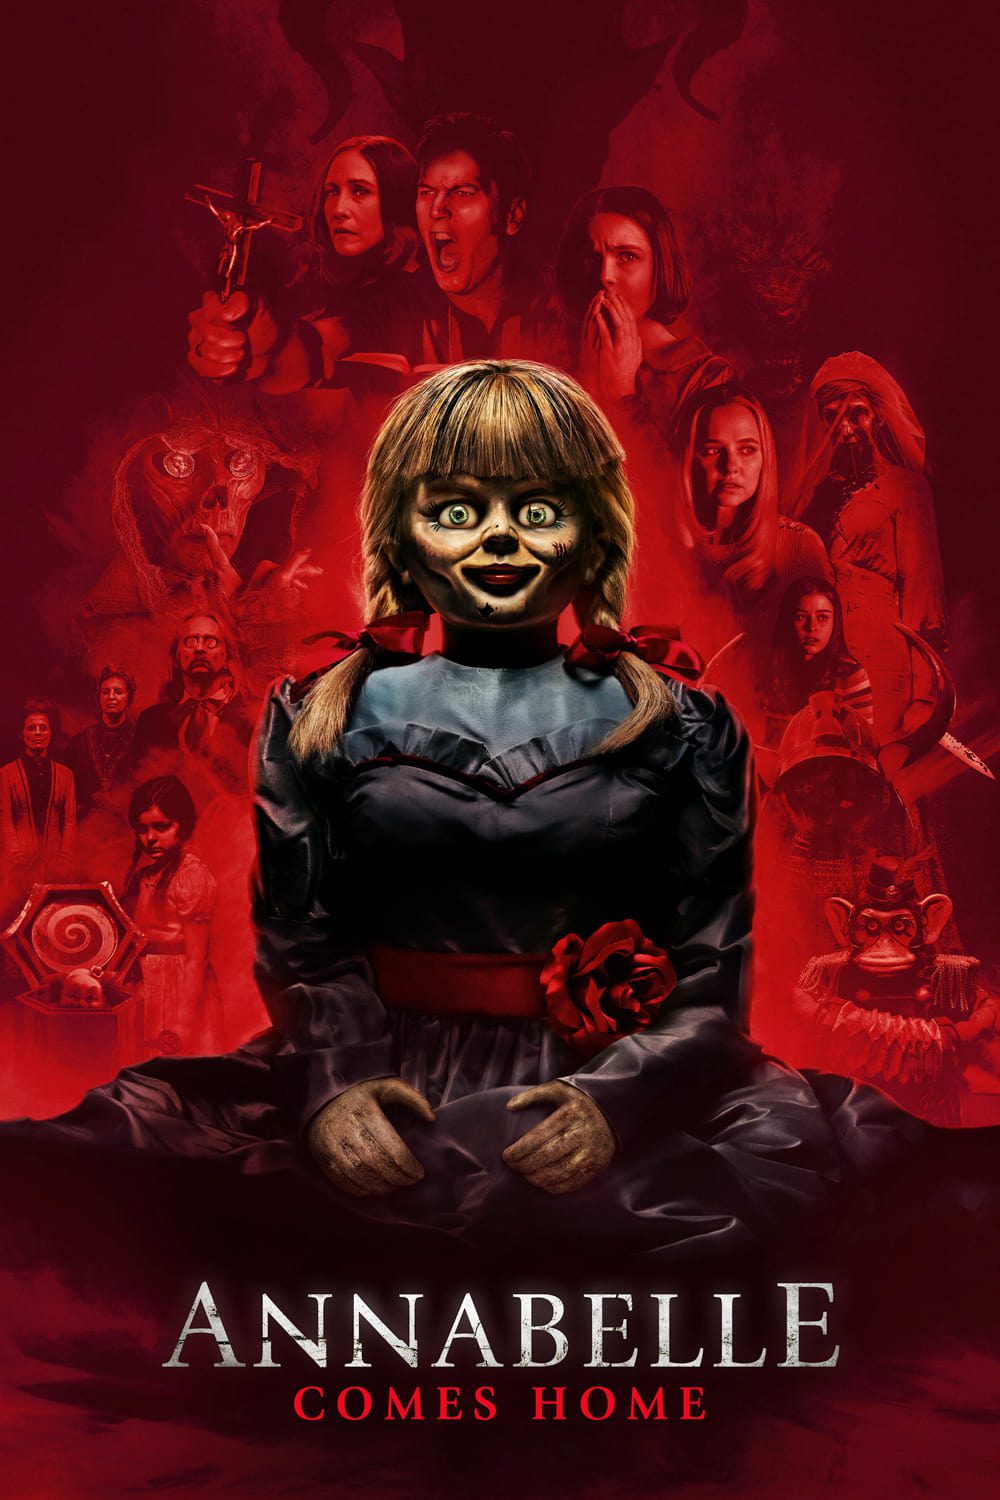 Poster for the movie "Annabelle Comes Home"